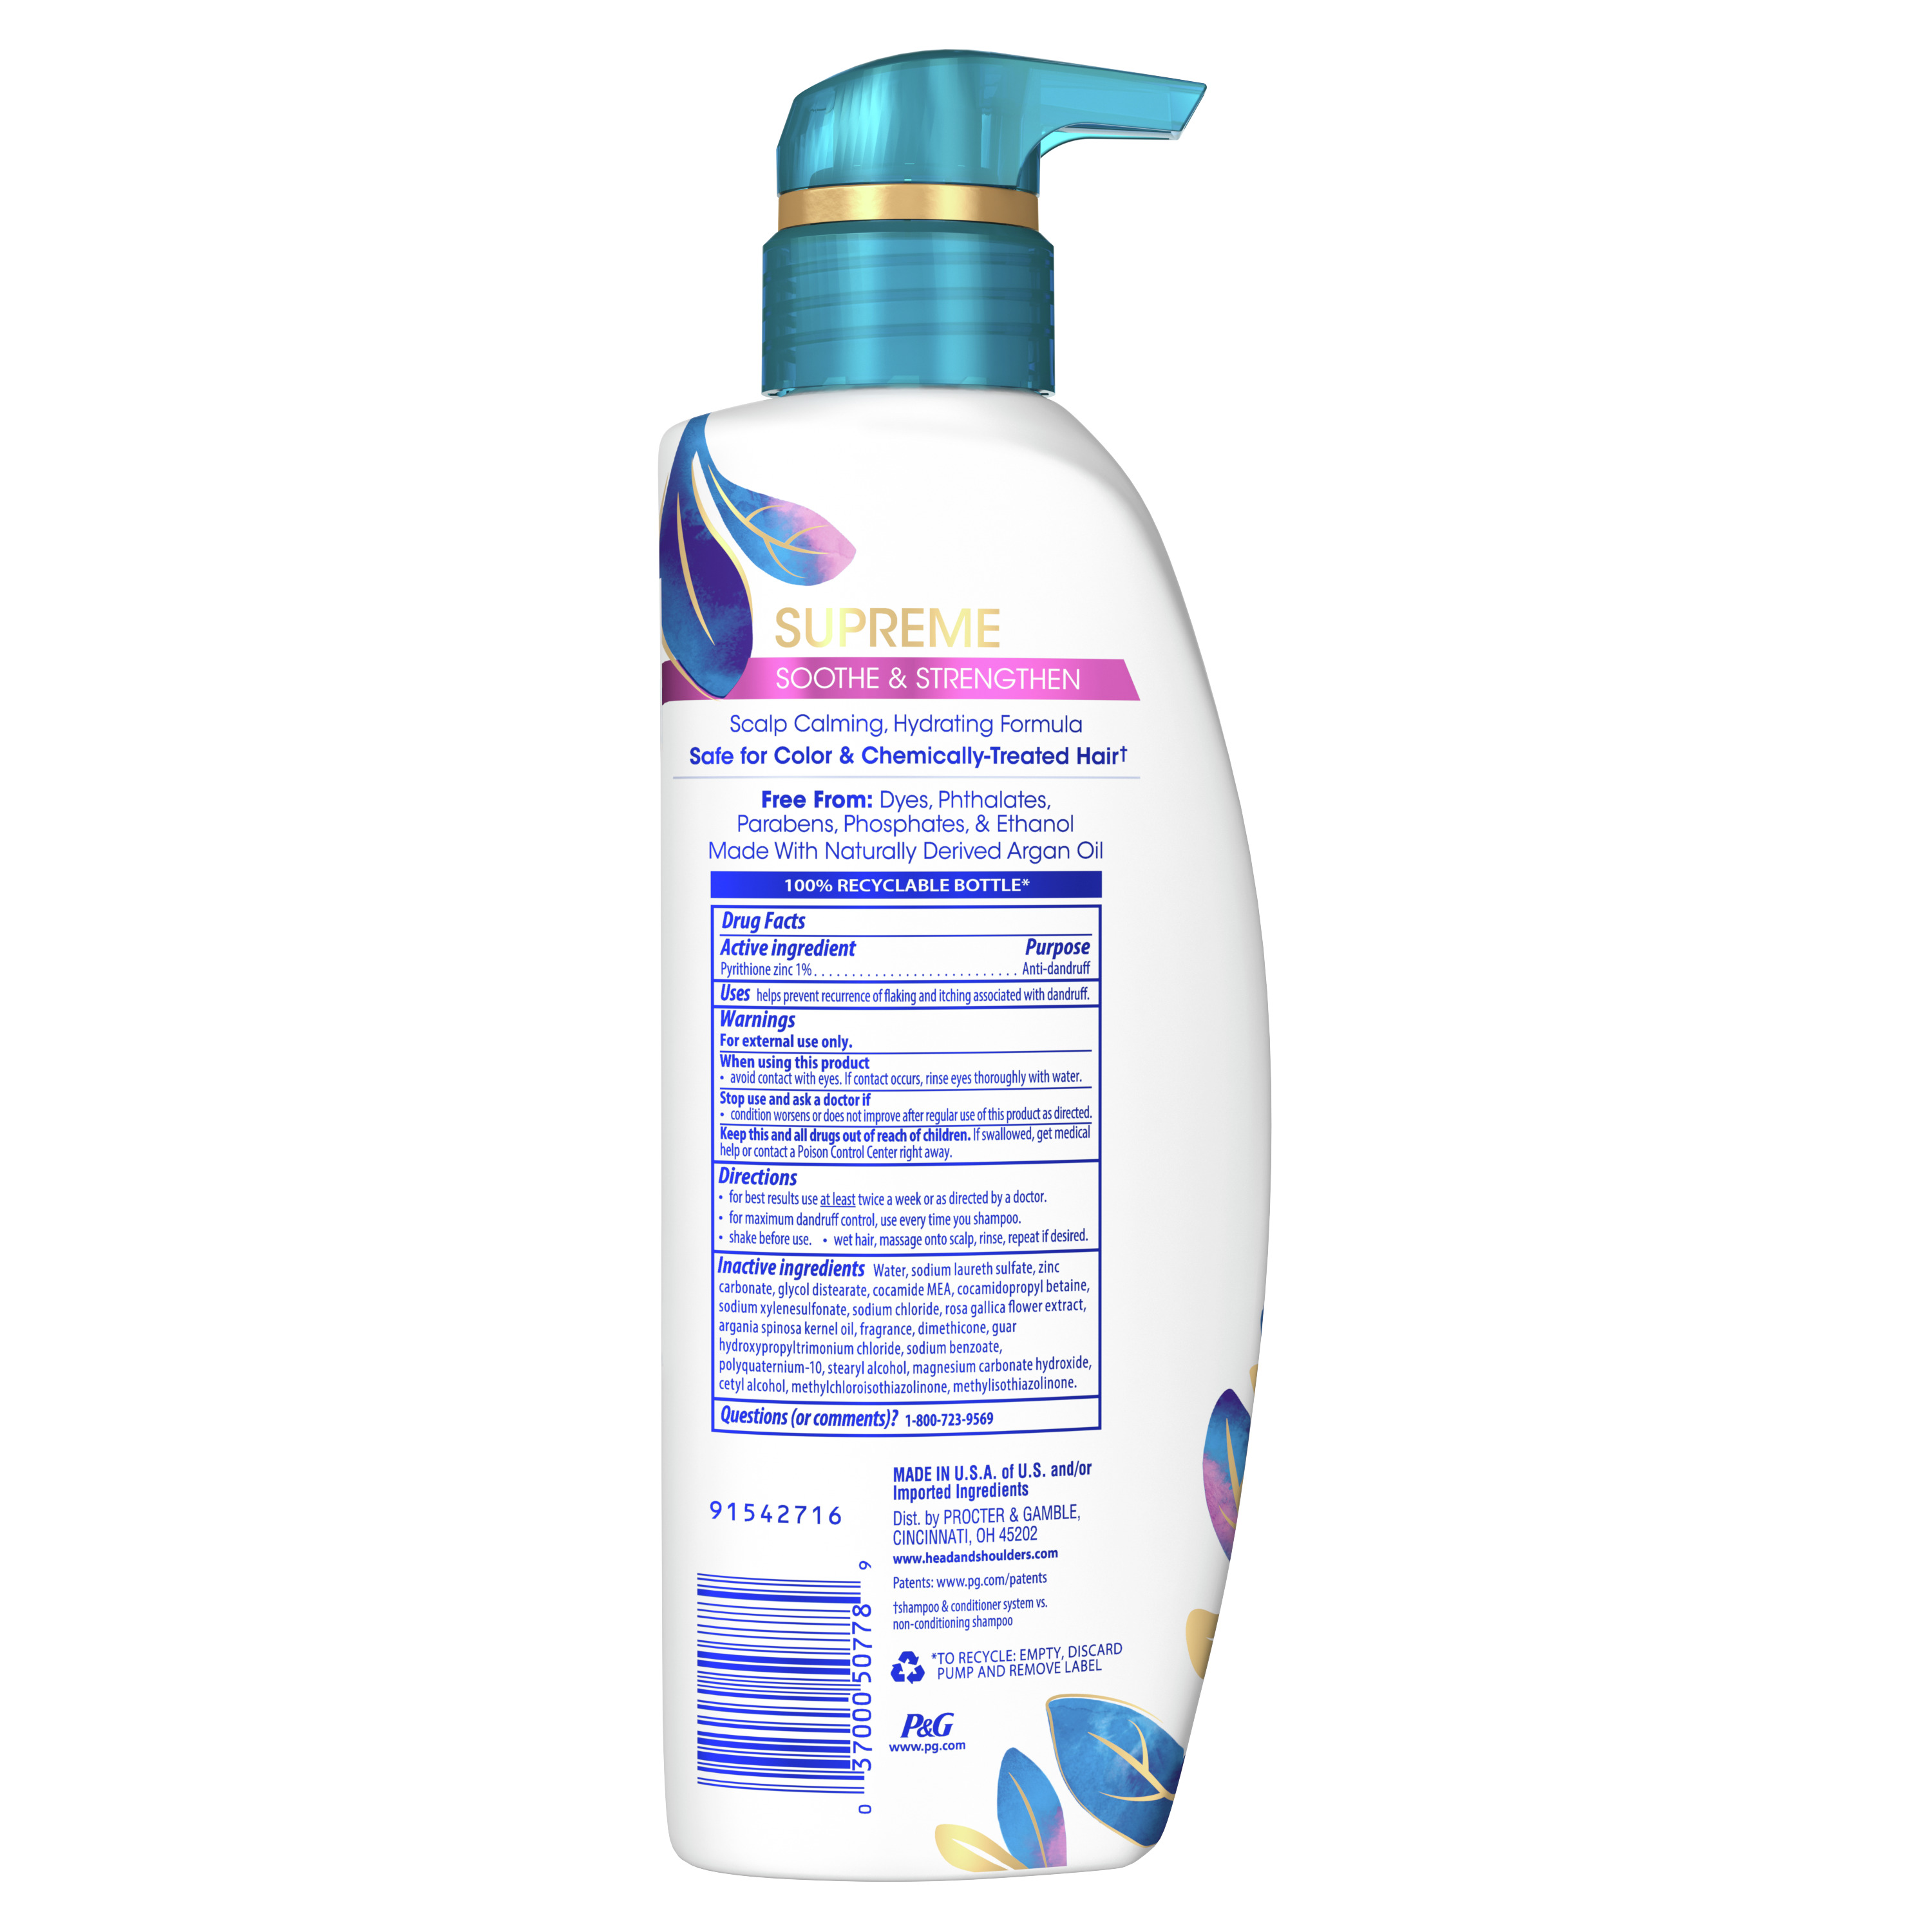 Head & Shoulders Supreme Moisturizing Soothe and Strengthen Dandruff Relief Daily Shampoo, 11.8 fl oz - image 2 of 9